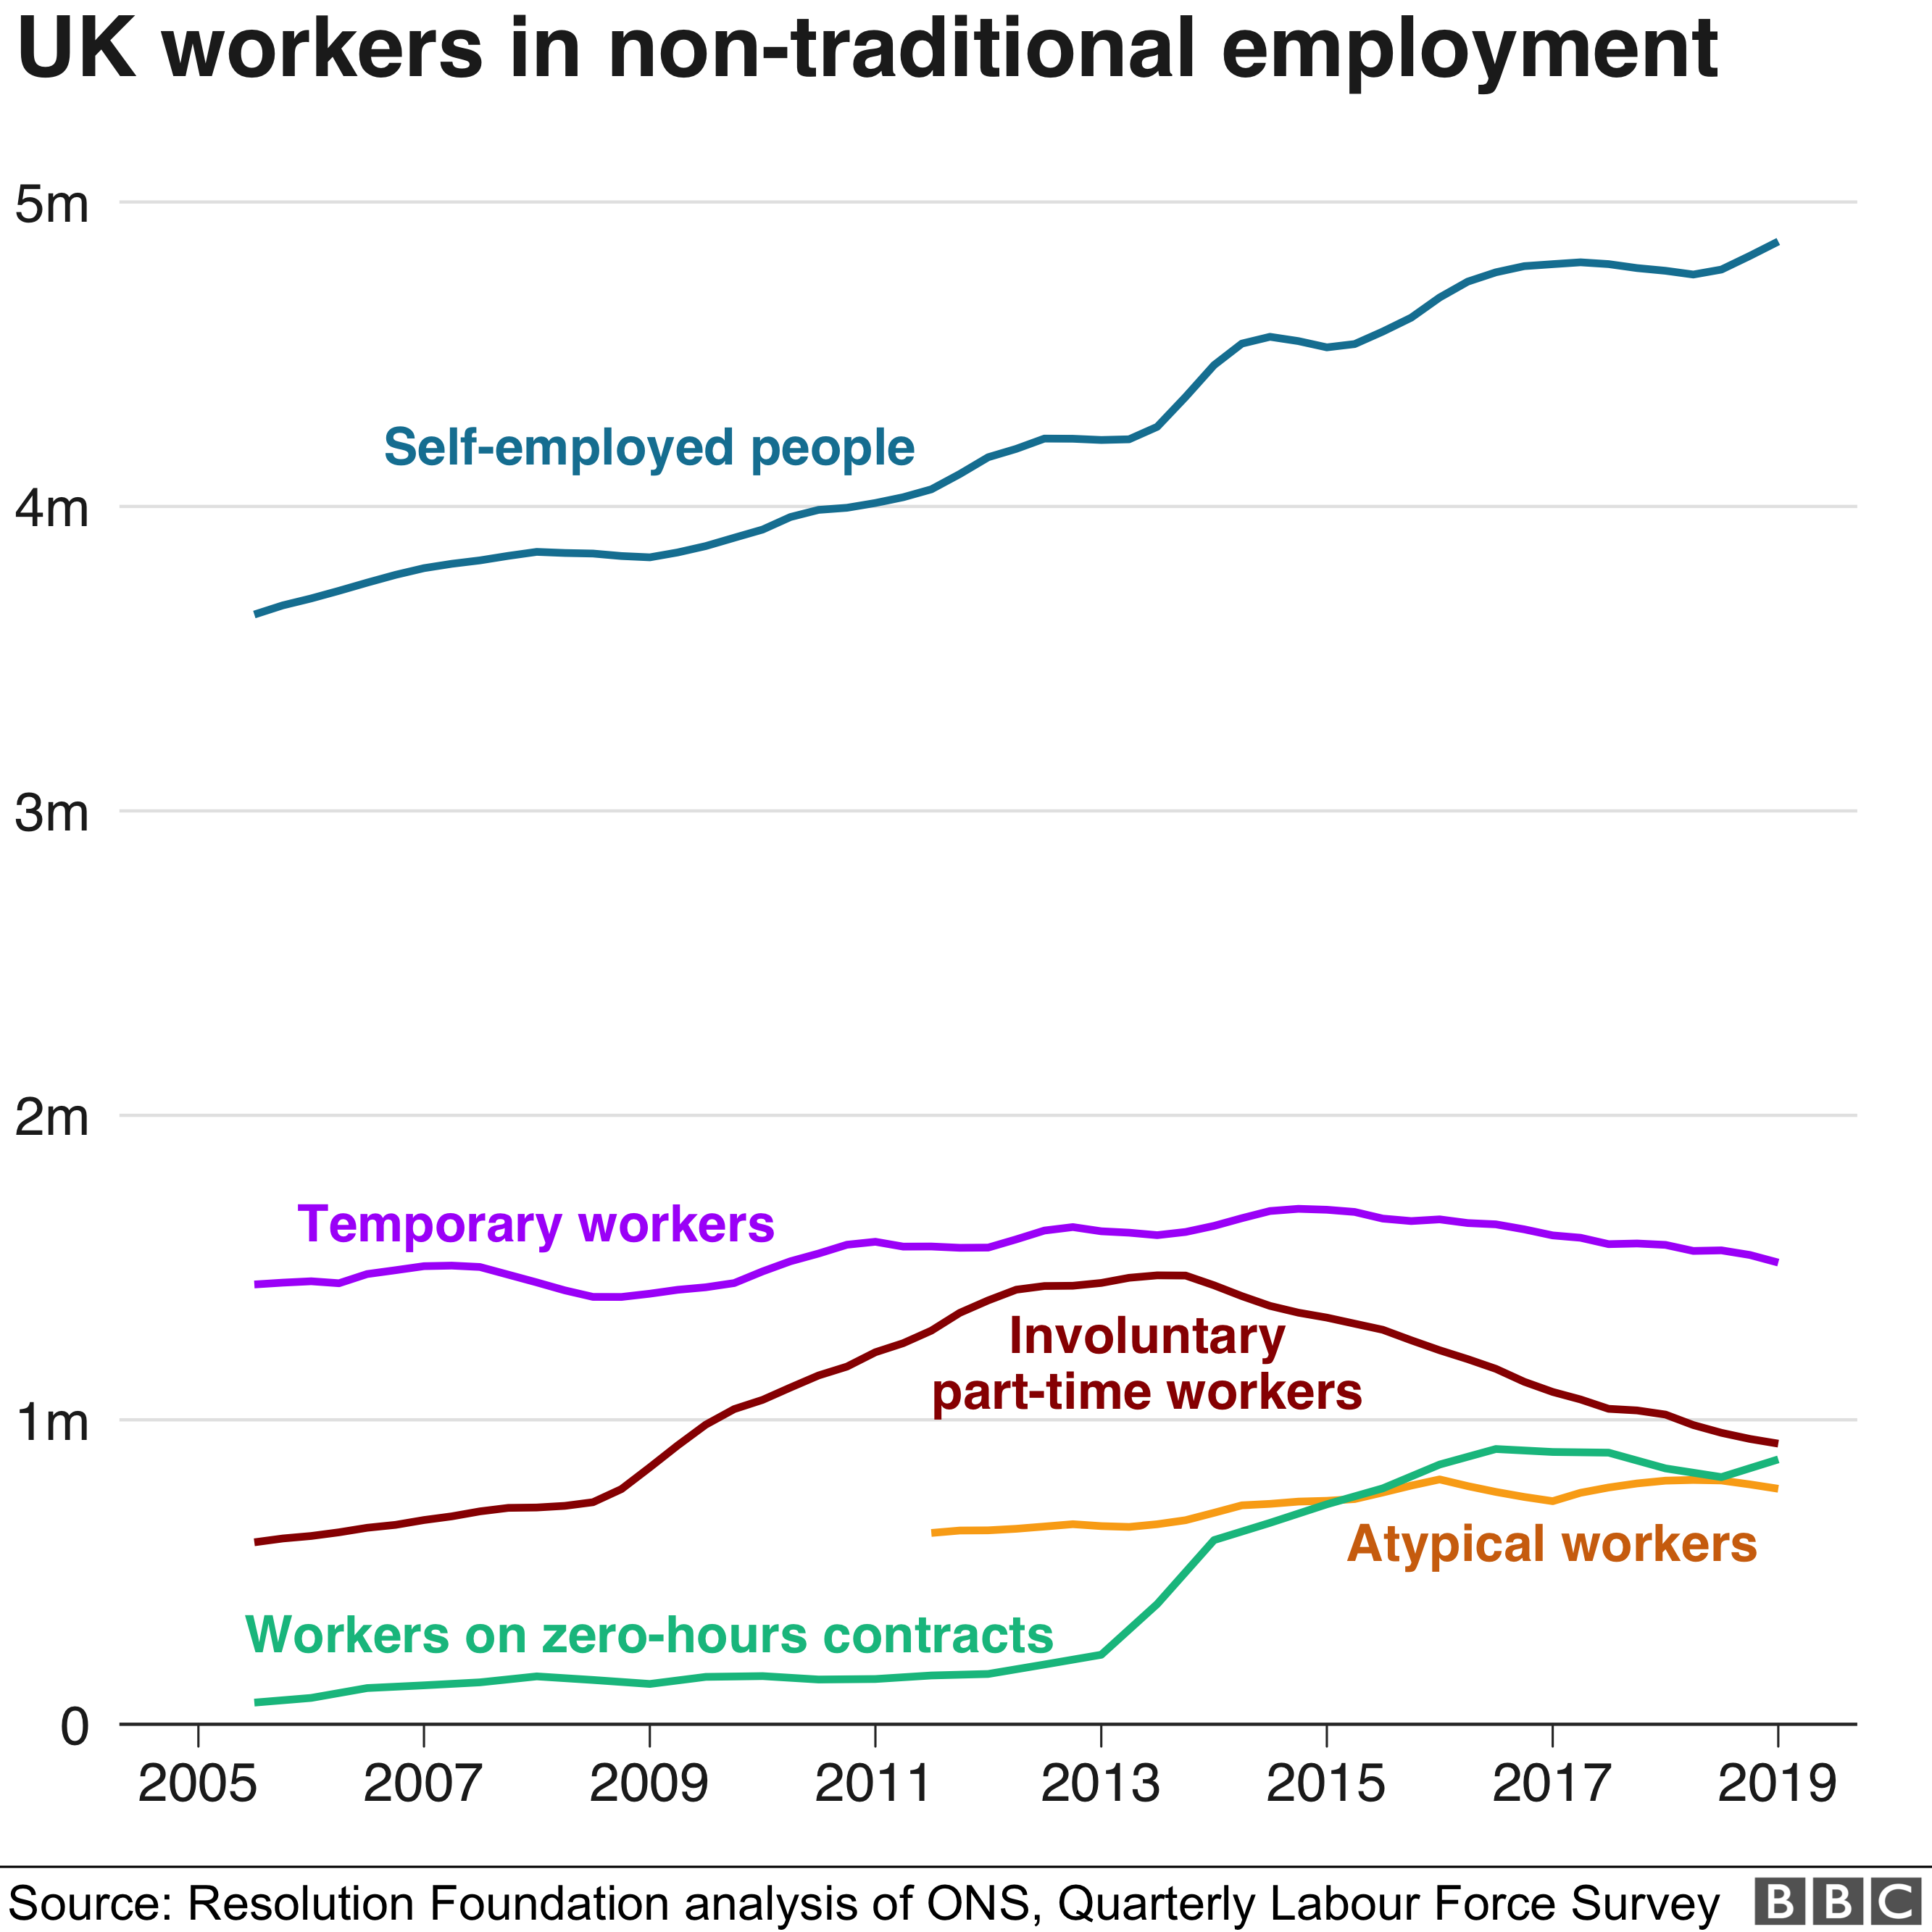 Workers in non-traditional employment